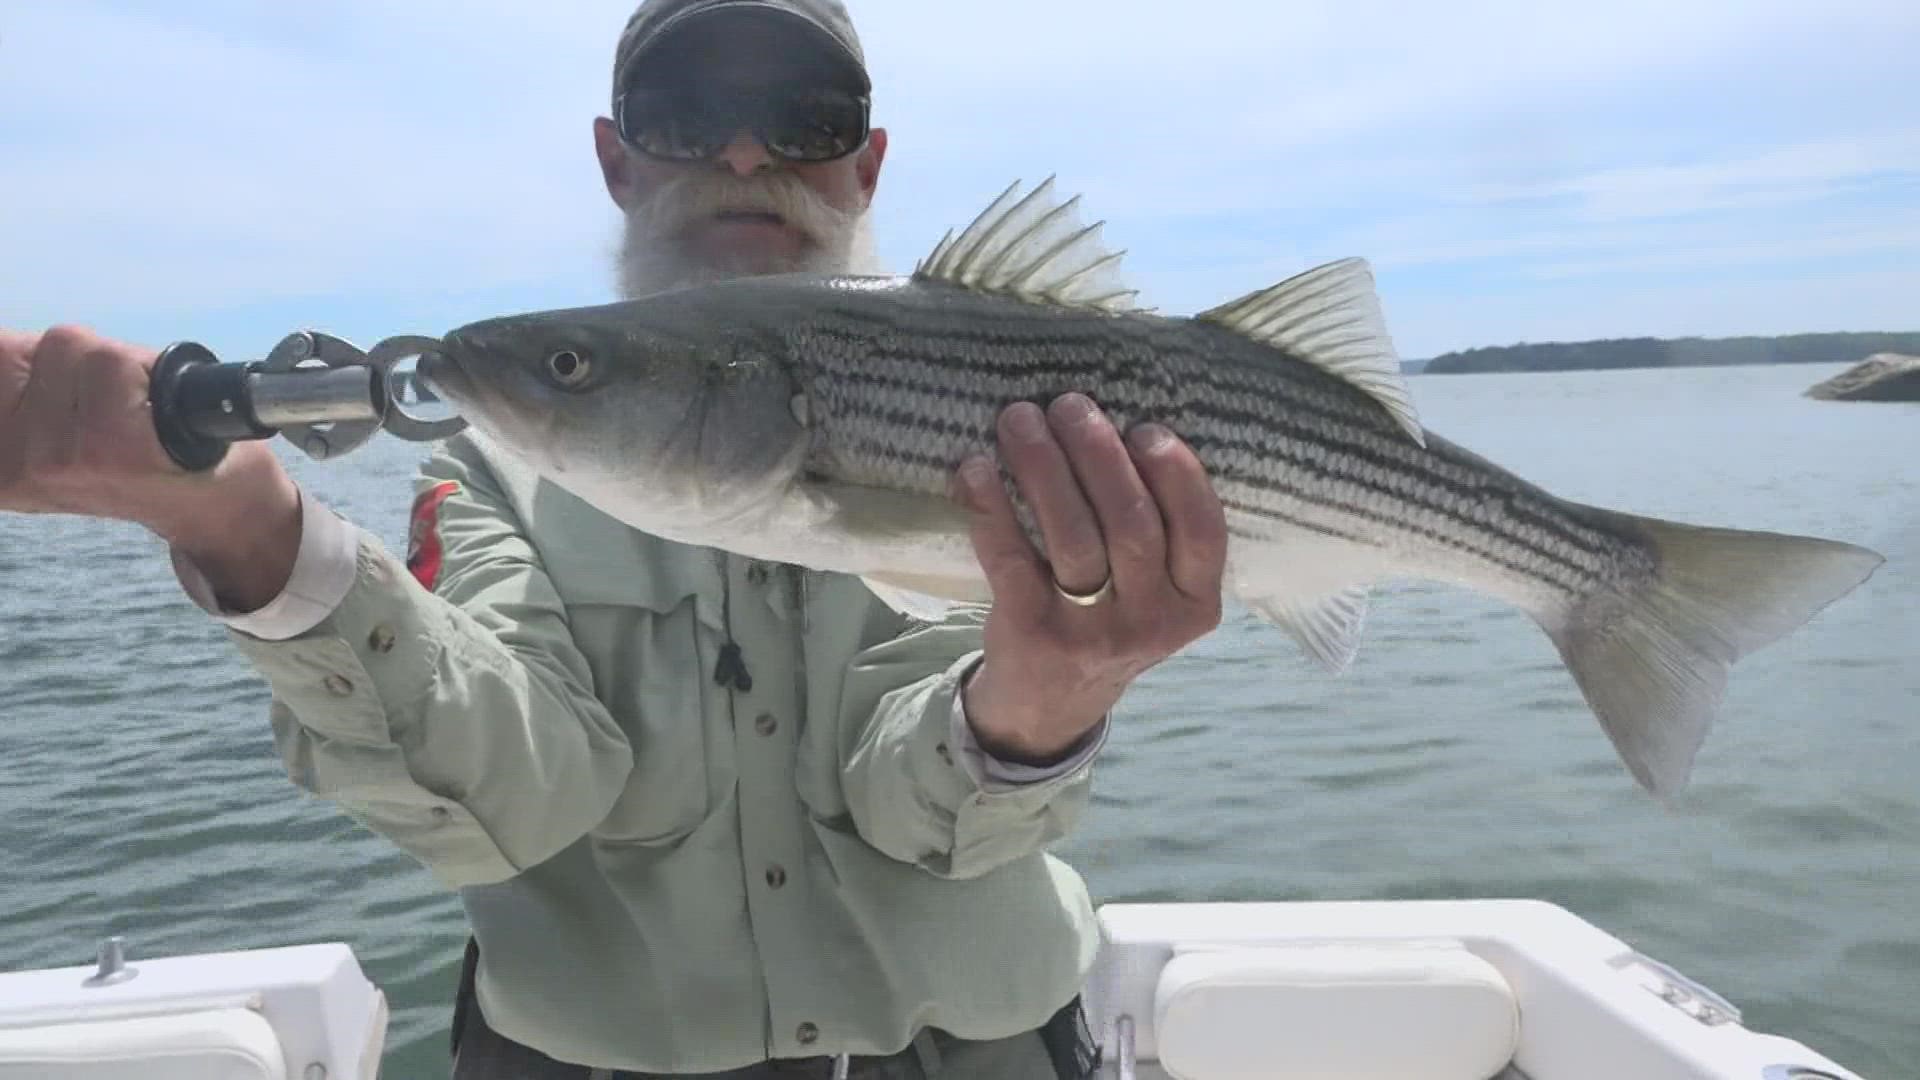 Striped bass are off the coast of Maine earlier than expected and in larger numbers, but the productive season is putting regulators on high alert.